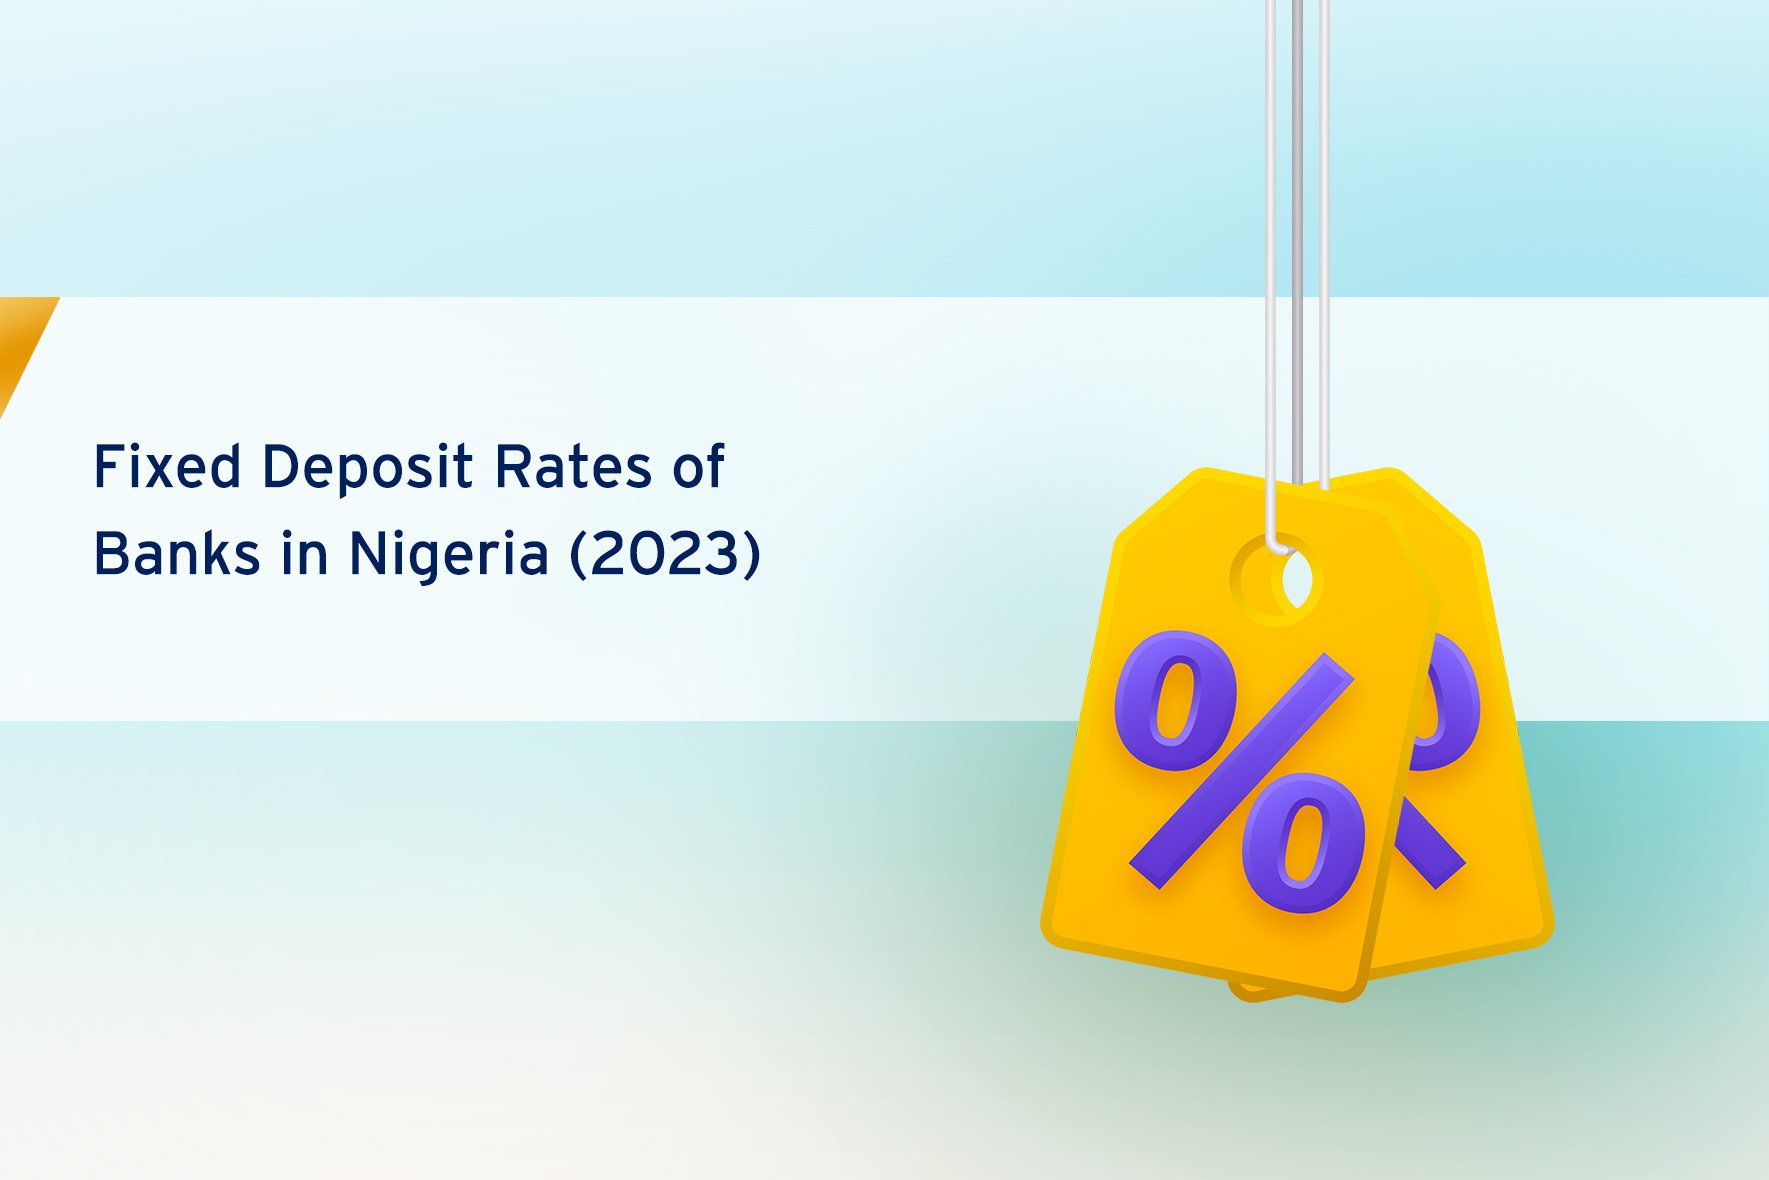 Fixed Deposit Rates of Banks in Nigeria (2023)